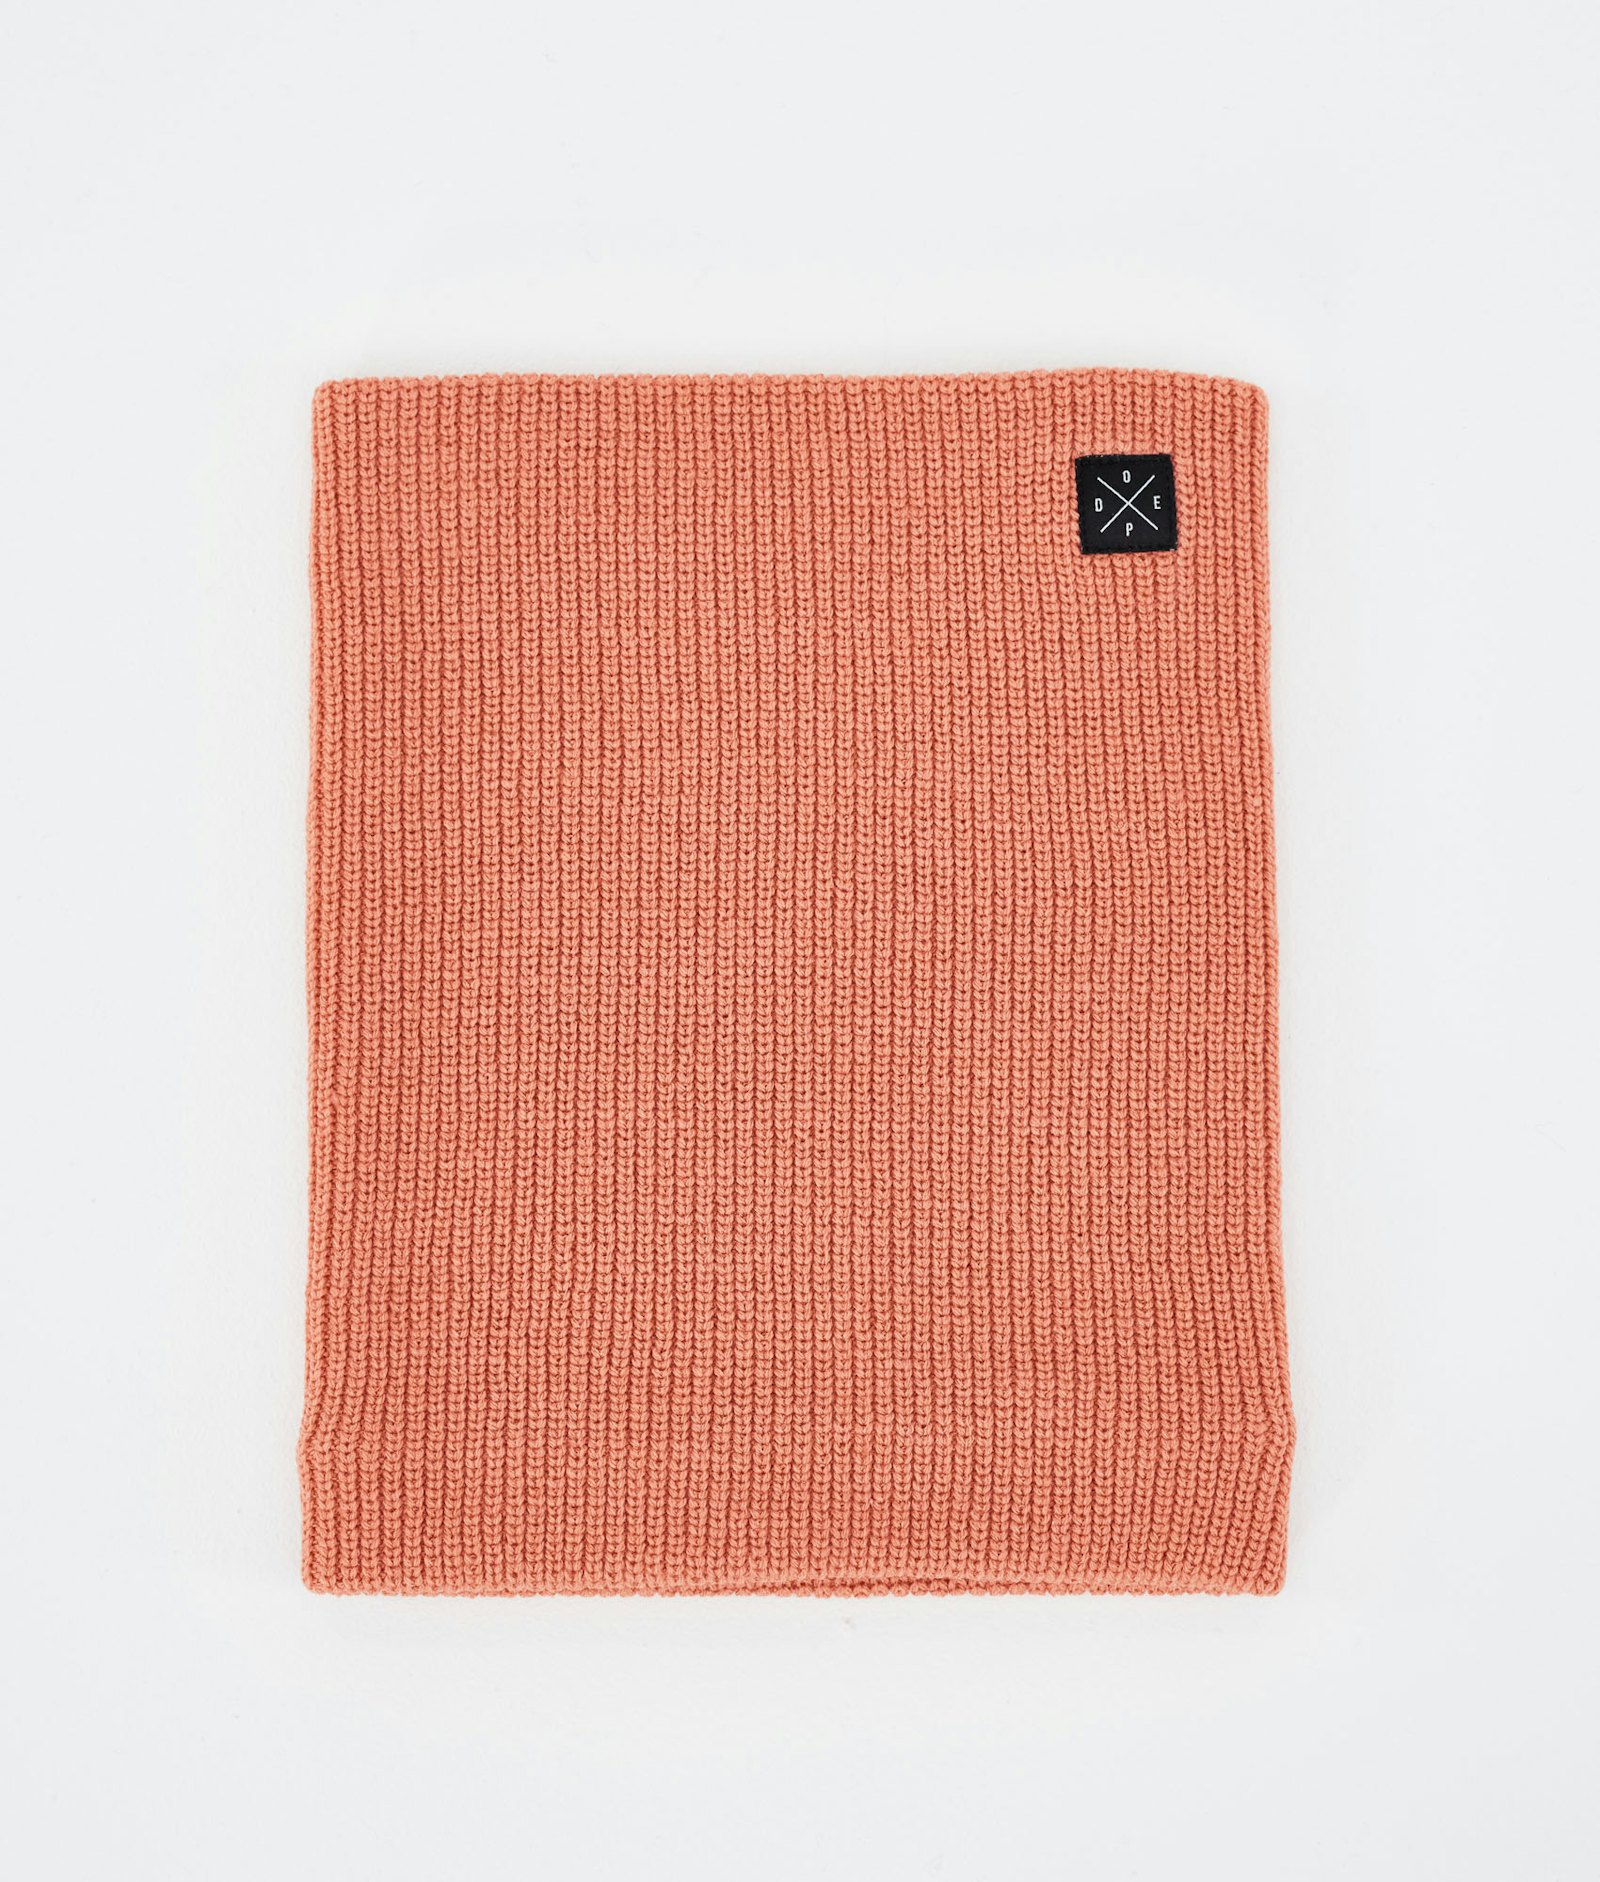 Dope 2X-UP Knitted Facemask Peach, Image 1 of 3